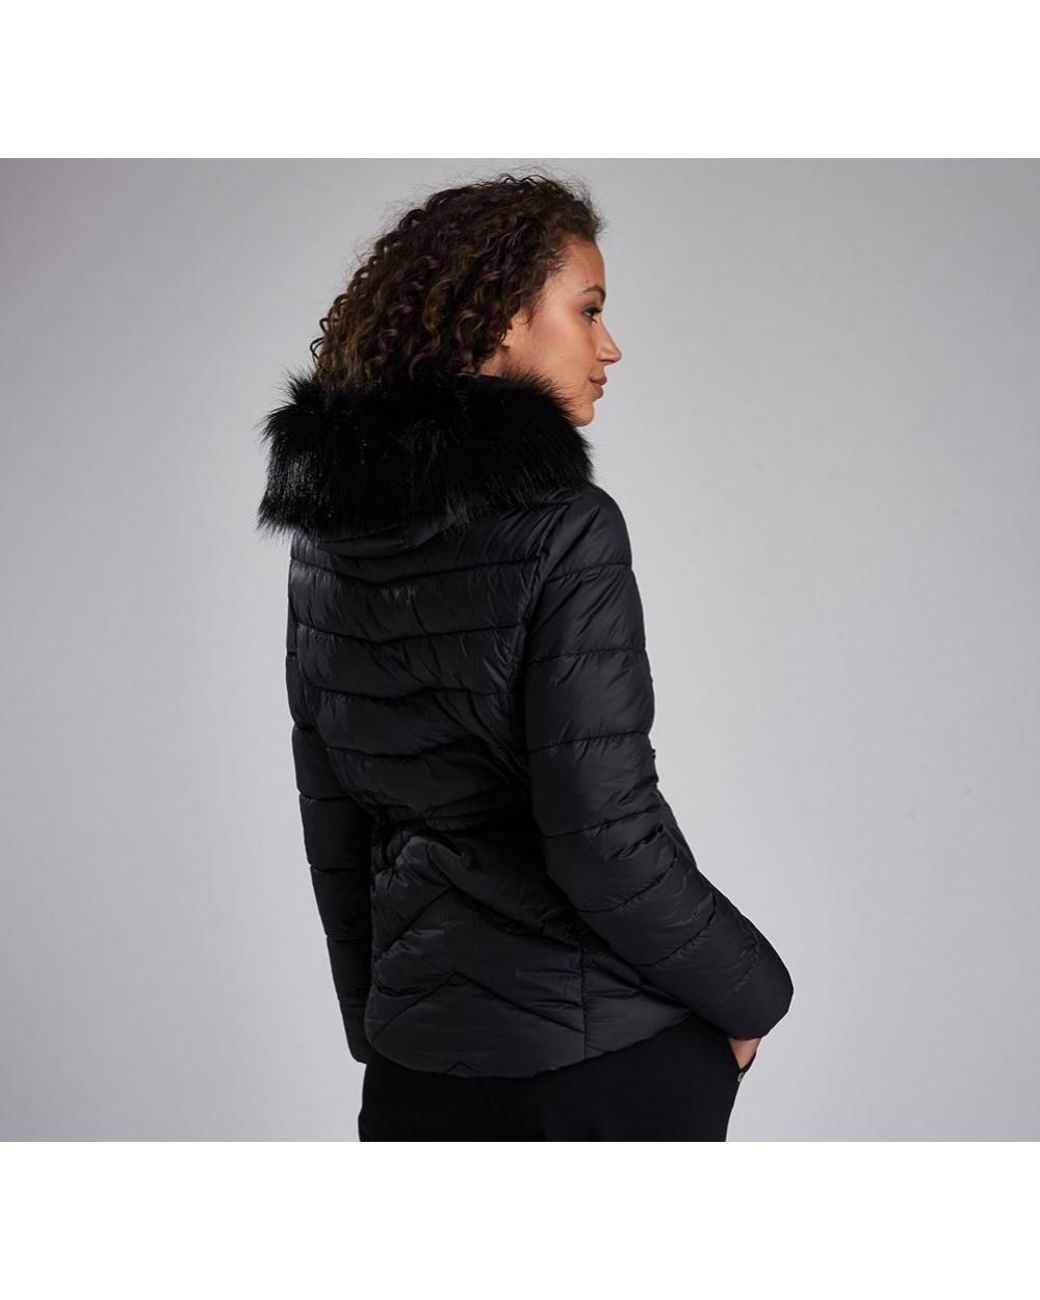 Barbour Island Quilted Womens Jacket in Black | Lyst UK